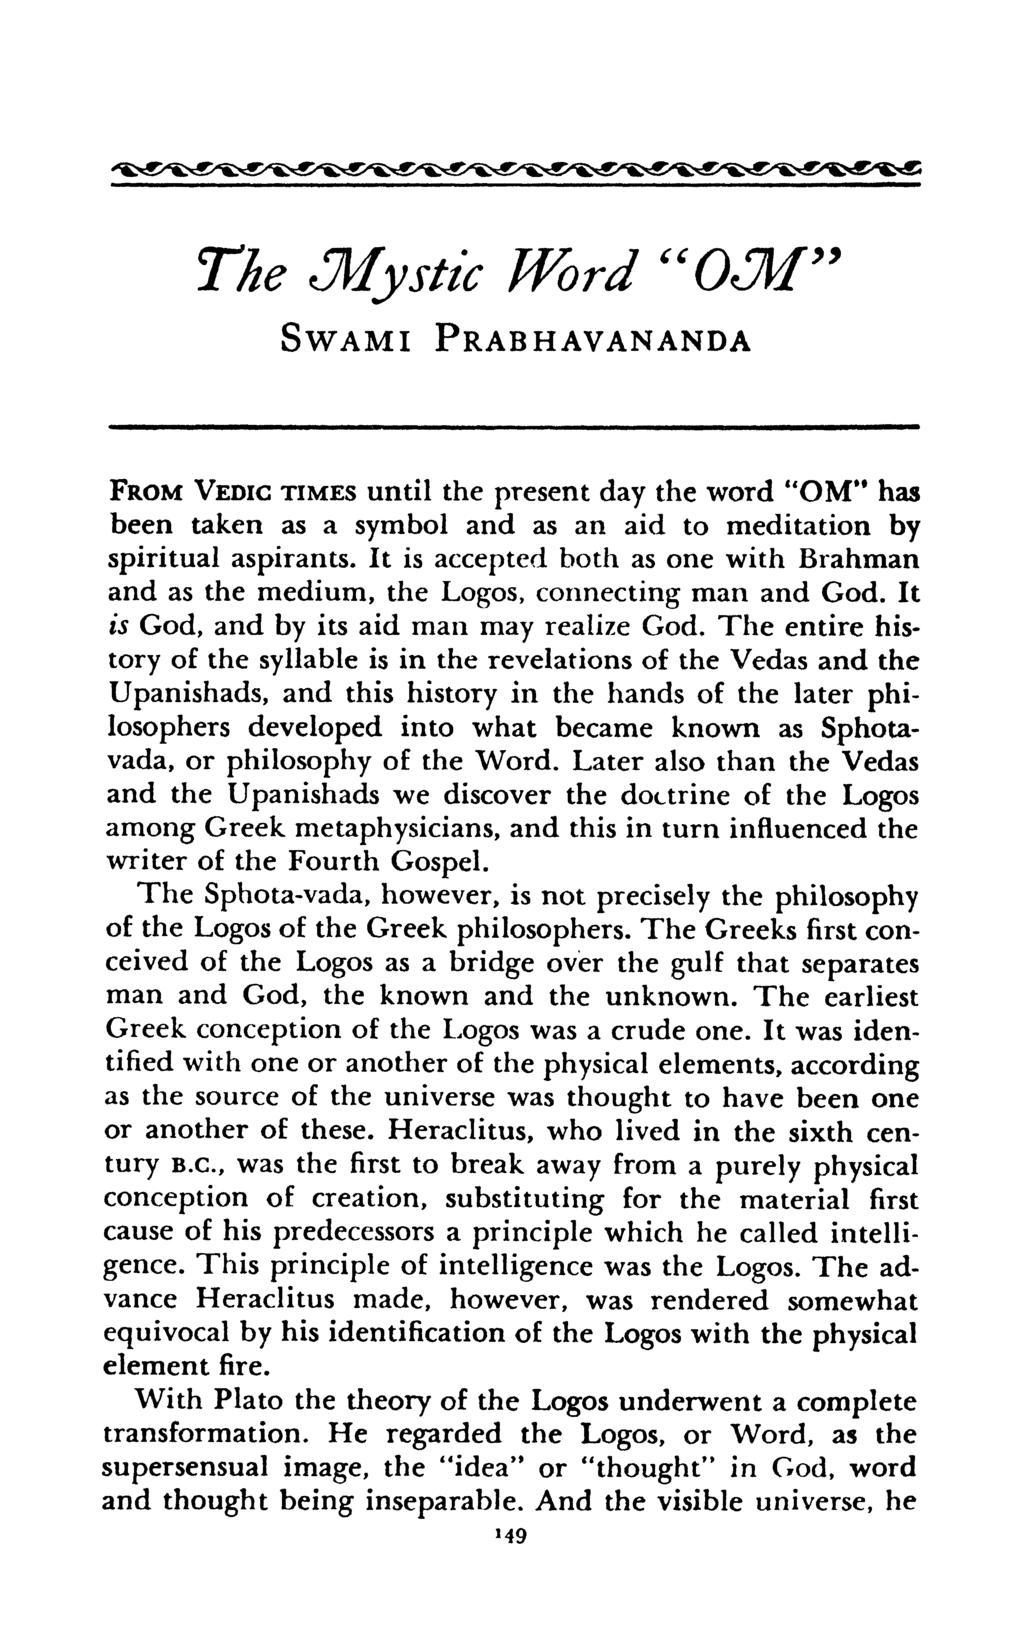 The Mystic Word "OM SWAMI PRABHAVANANDA FROM VEDIC TIMES until the present day the word "OM" has been taken as a symbol and as an aid to meditation by spiritual aspirants.